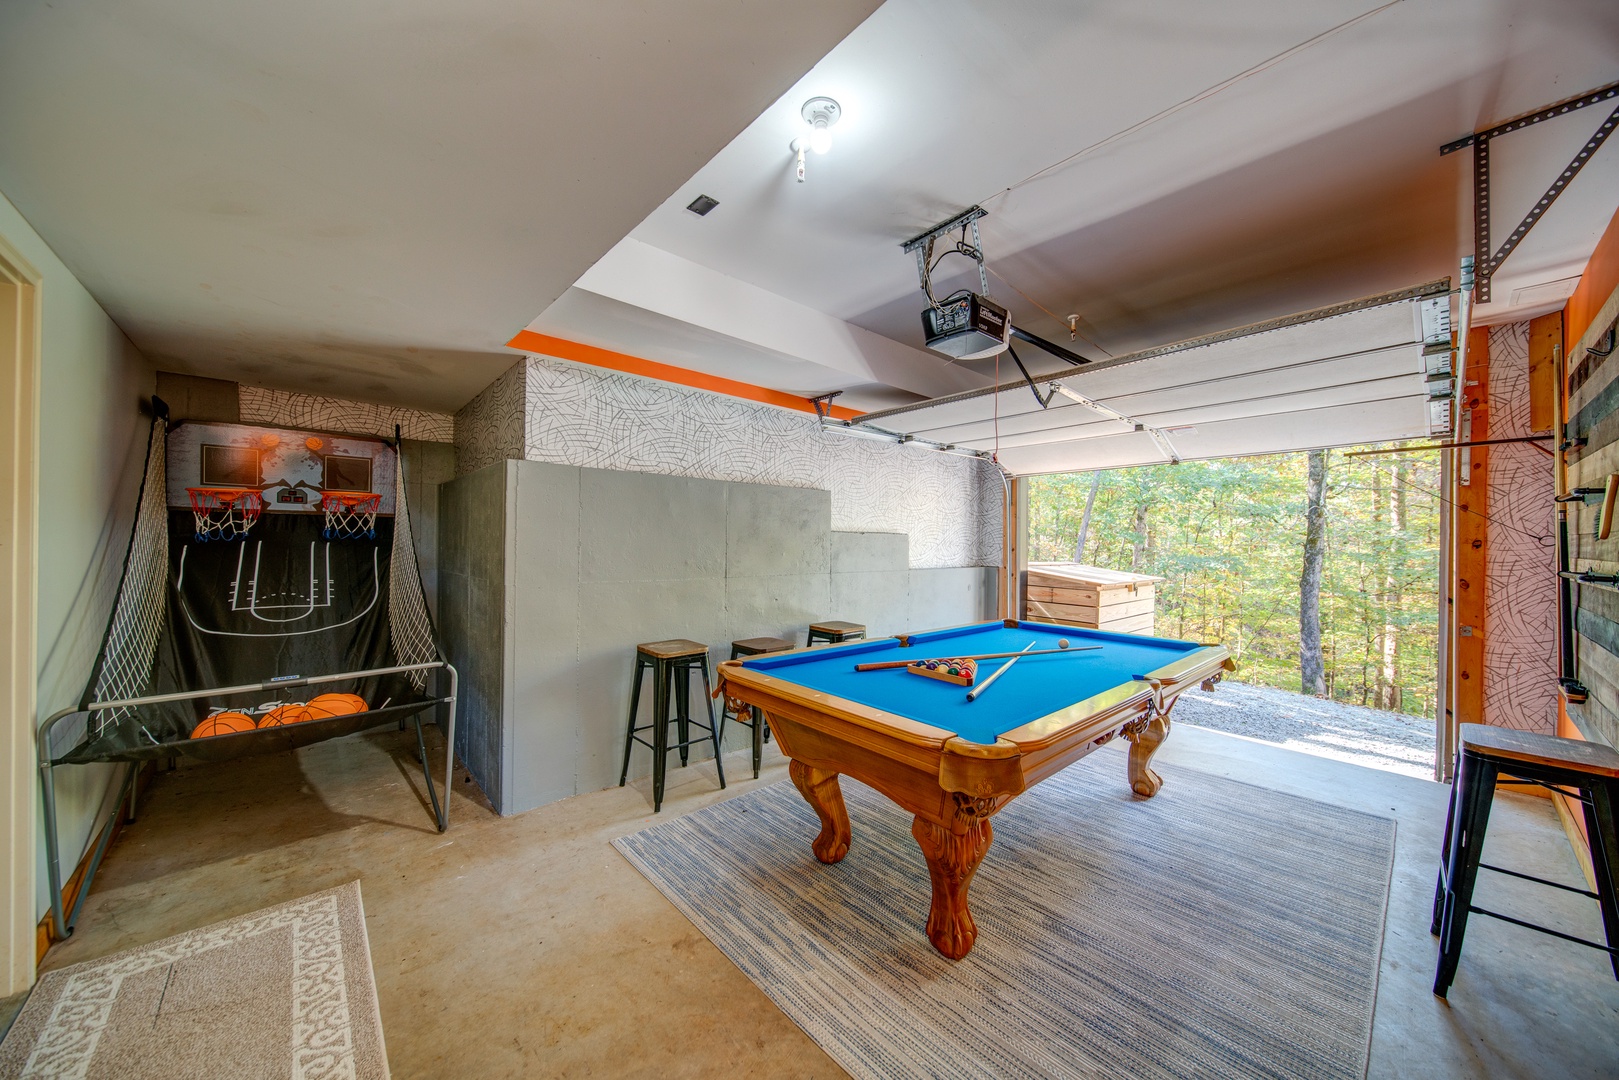 Open the garage doo and have open air concept game room